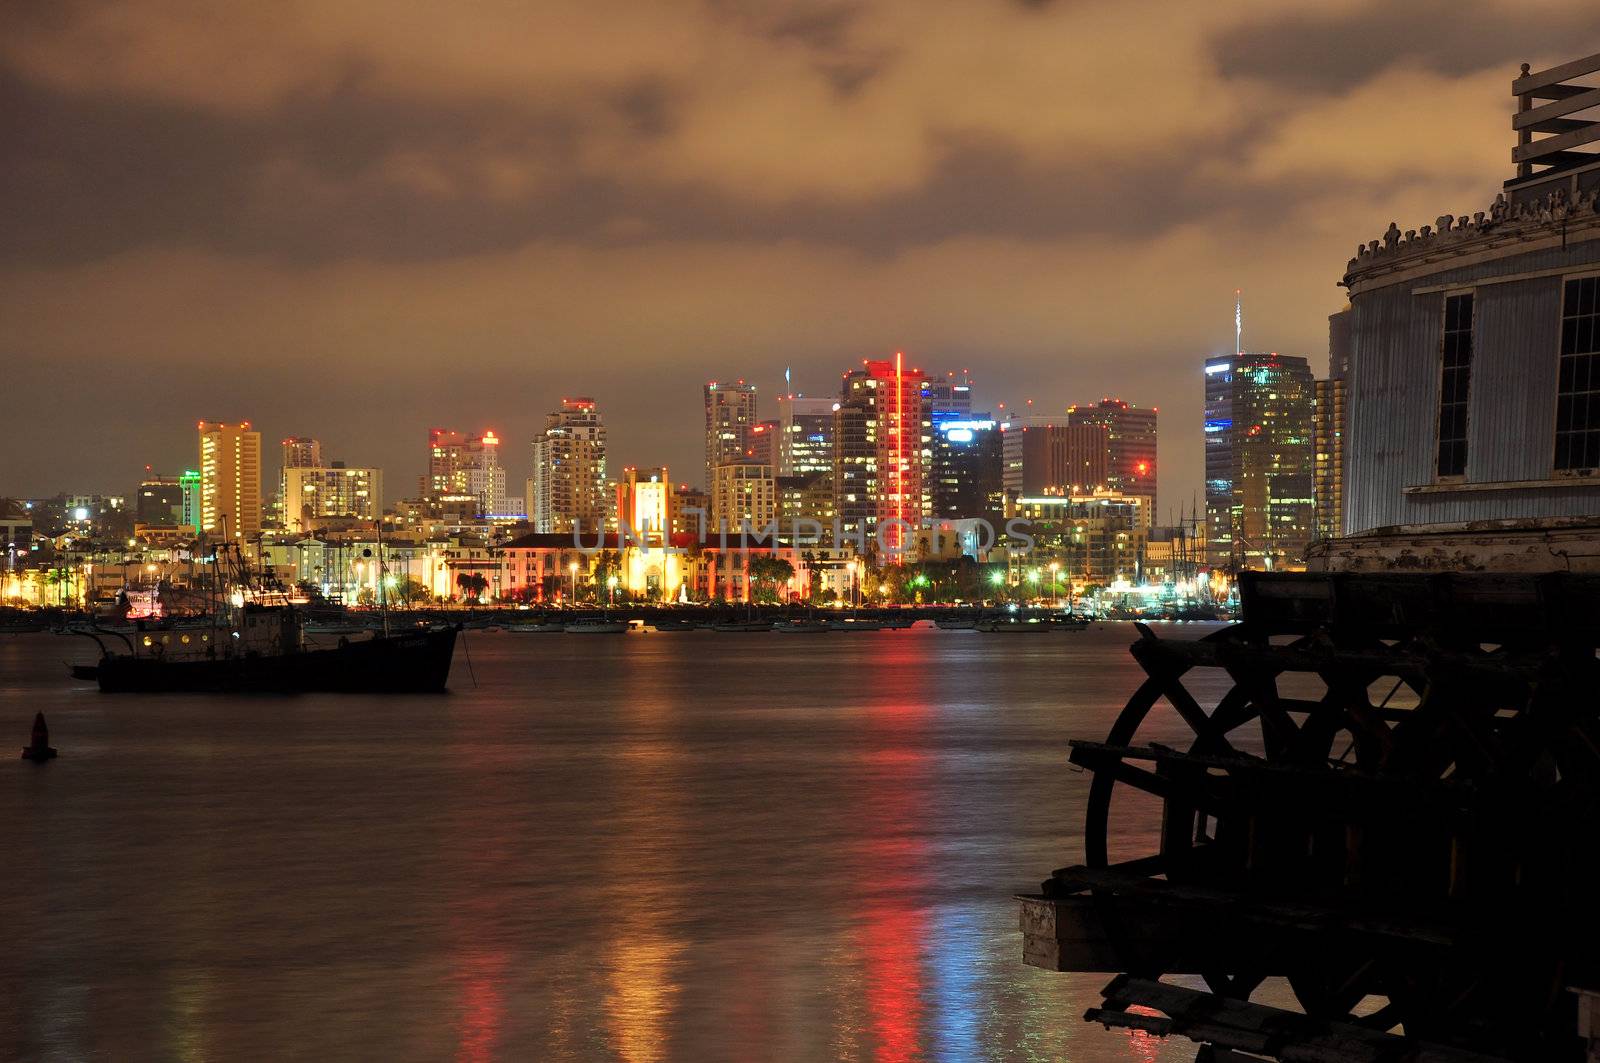 An old paddle wheel boat frames this view of the San Diego city skyline at night.